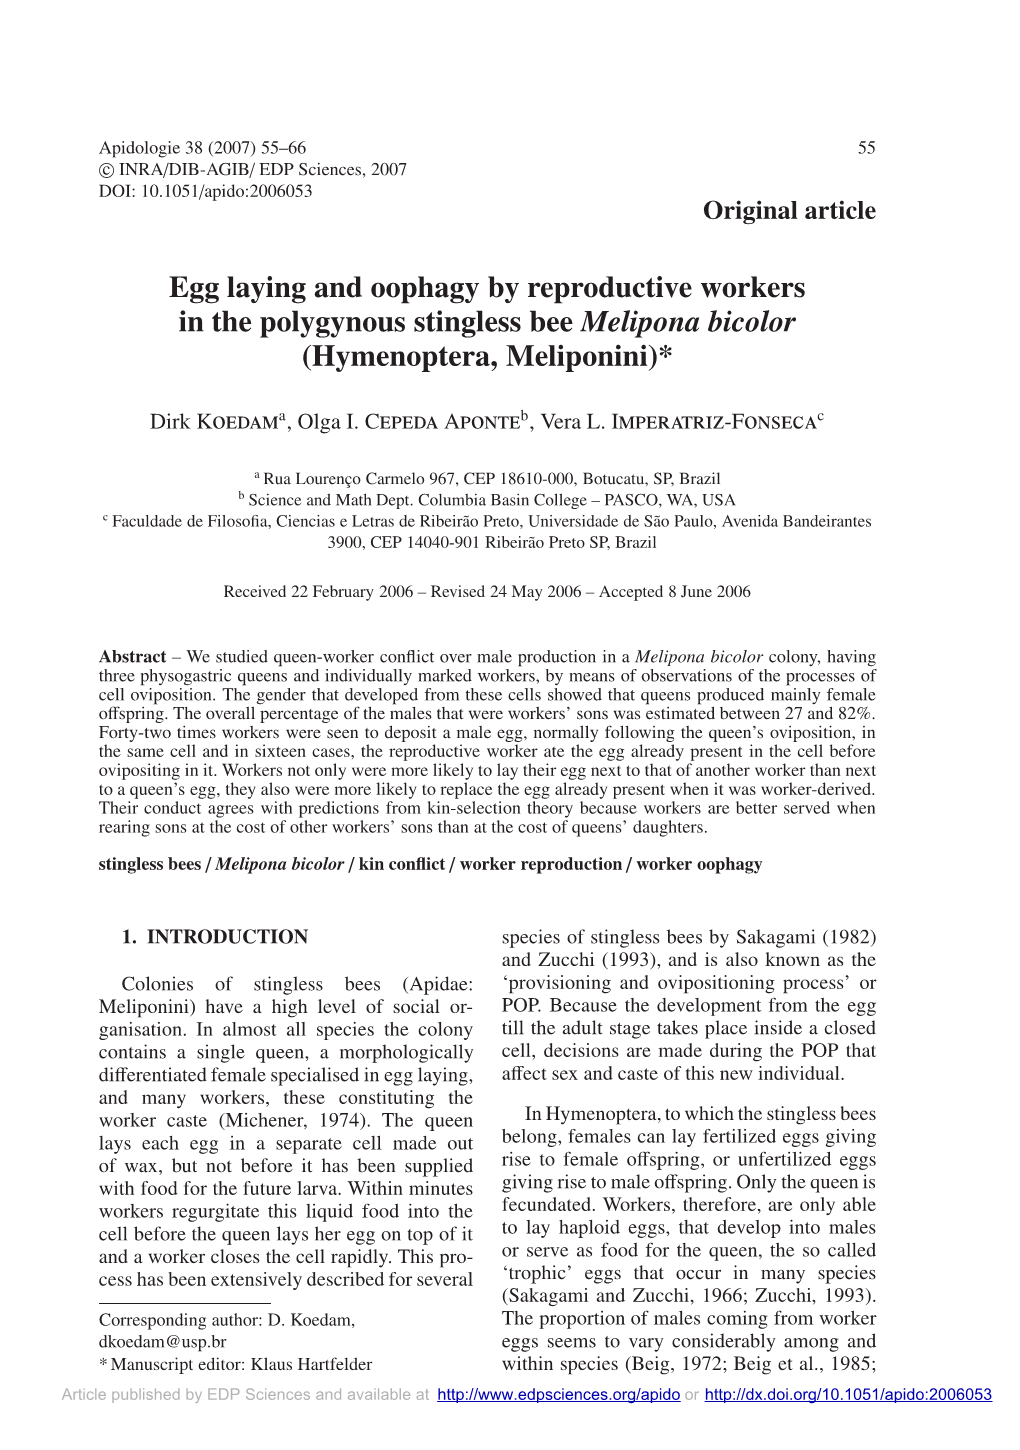 Egg Laying and Oophagy by Reproductive Workers in the Polygynous Stingless Bee Melipona Bicolor (Hymenoptera, Meliponini)*